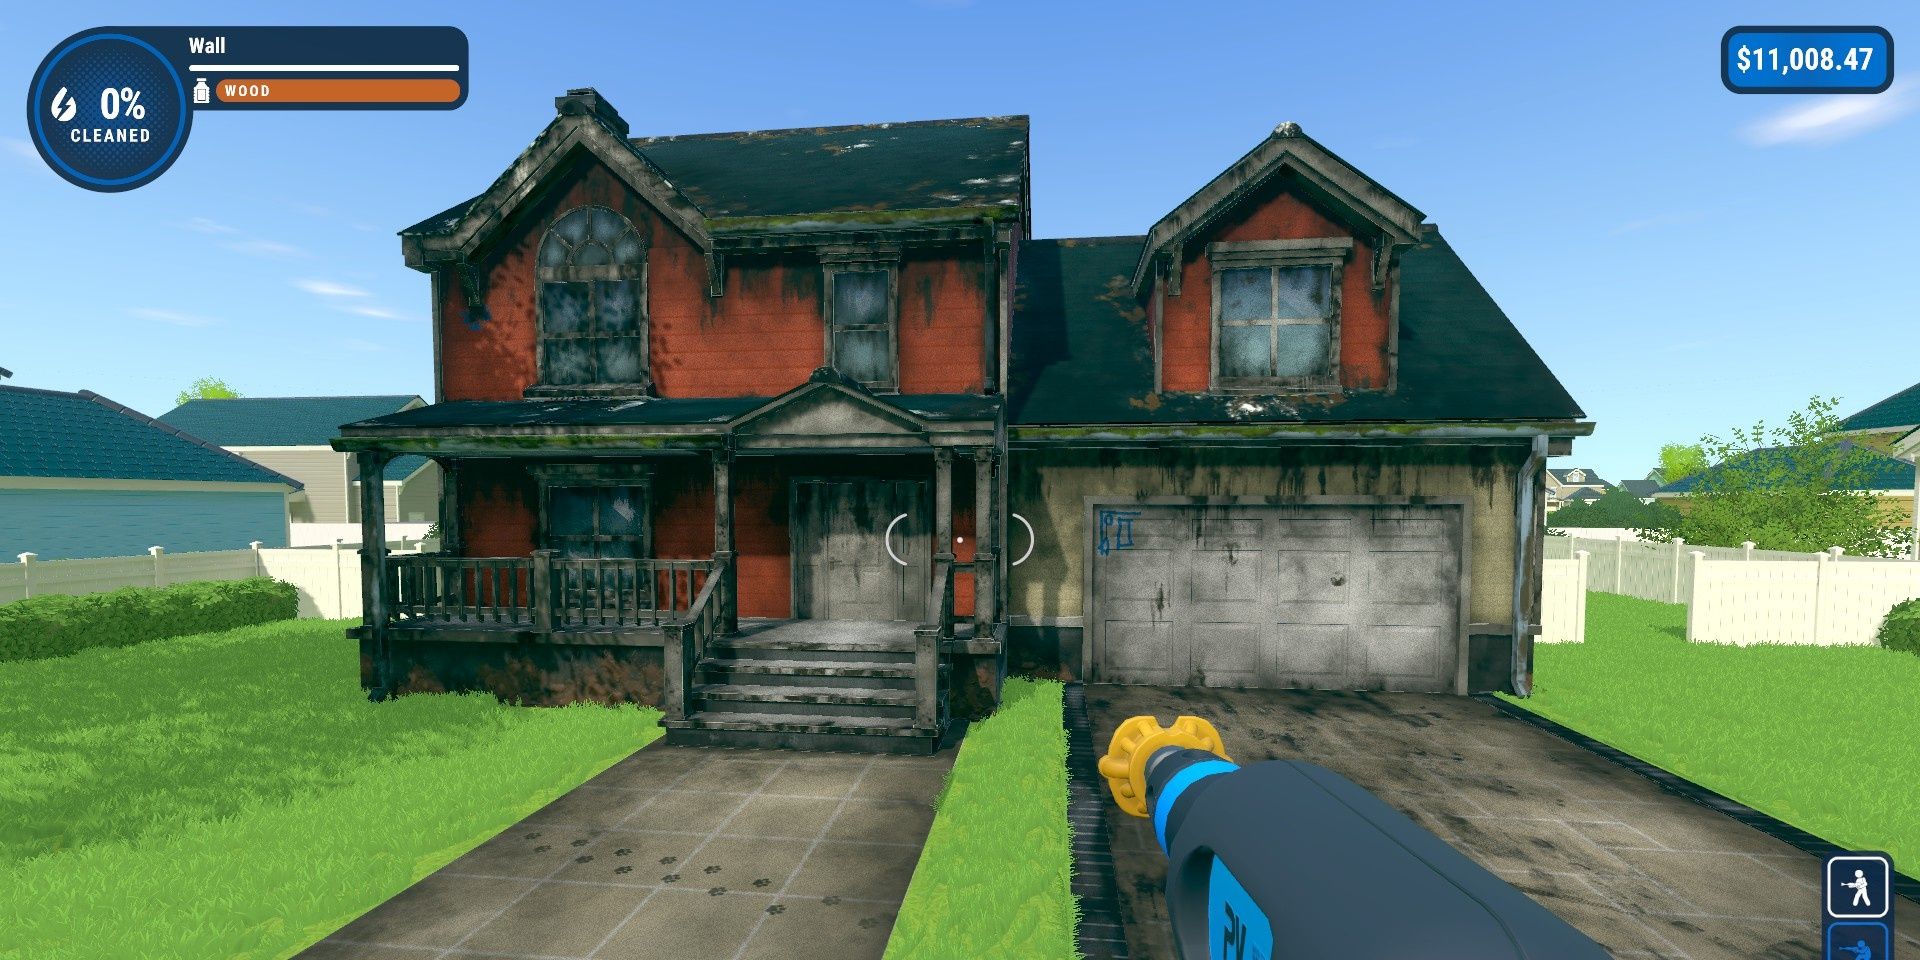 The Detached House uncleaned in PowerWash Simulator